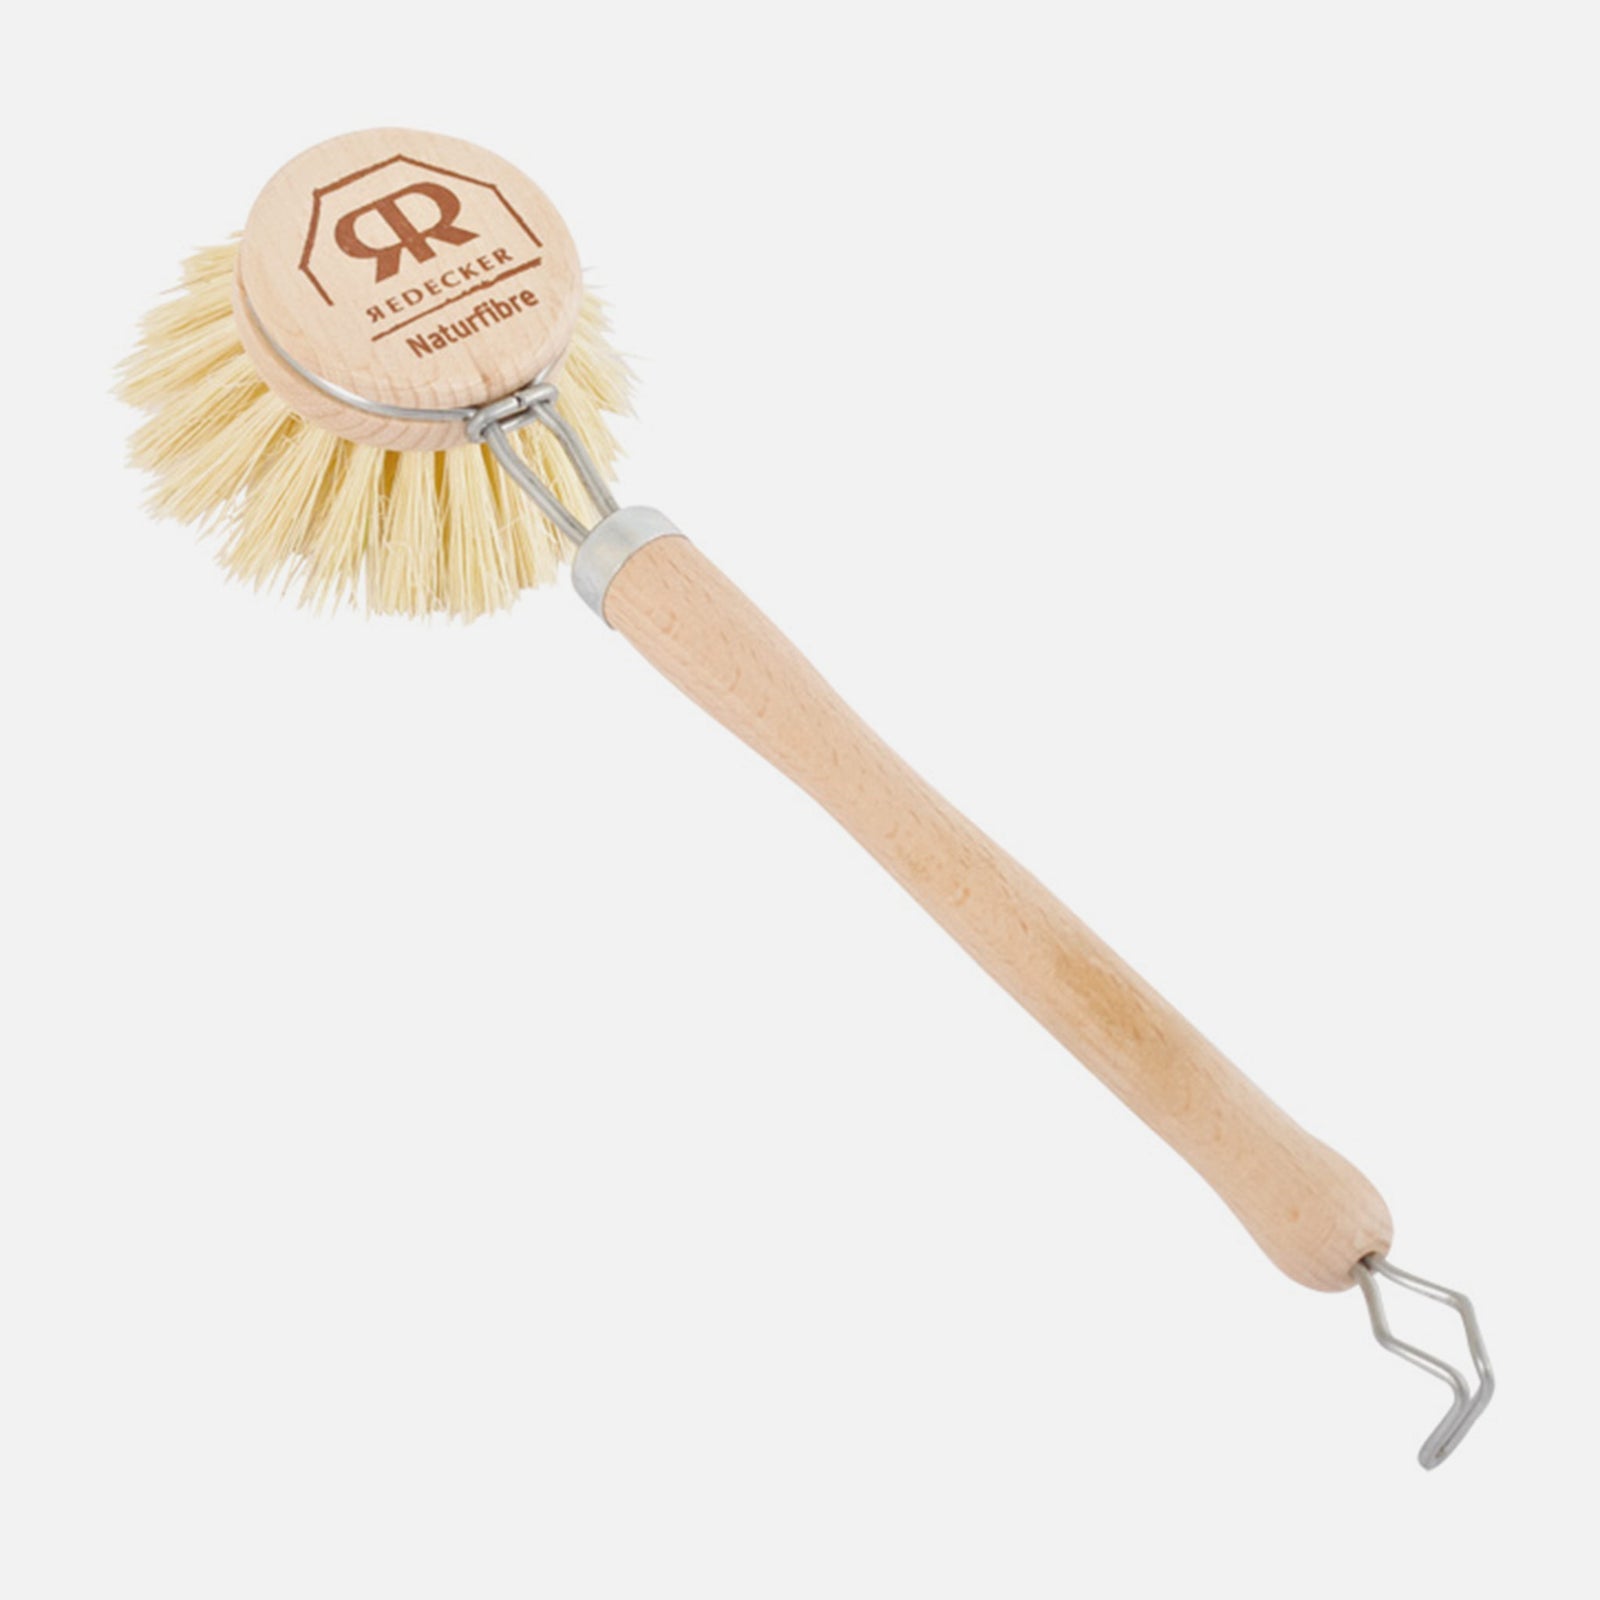 Redecker - Dish Washing Long Handled Tampico Brush and Replacement Head 4cm